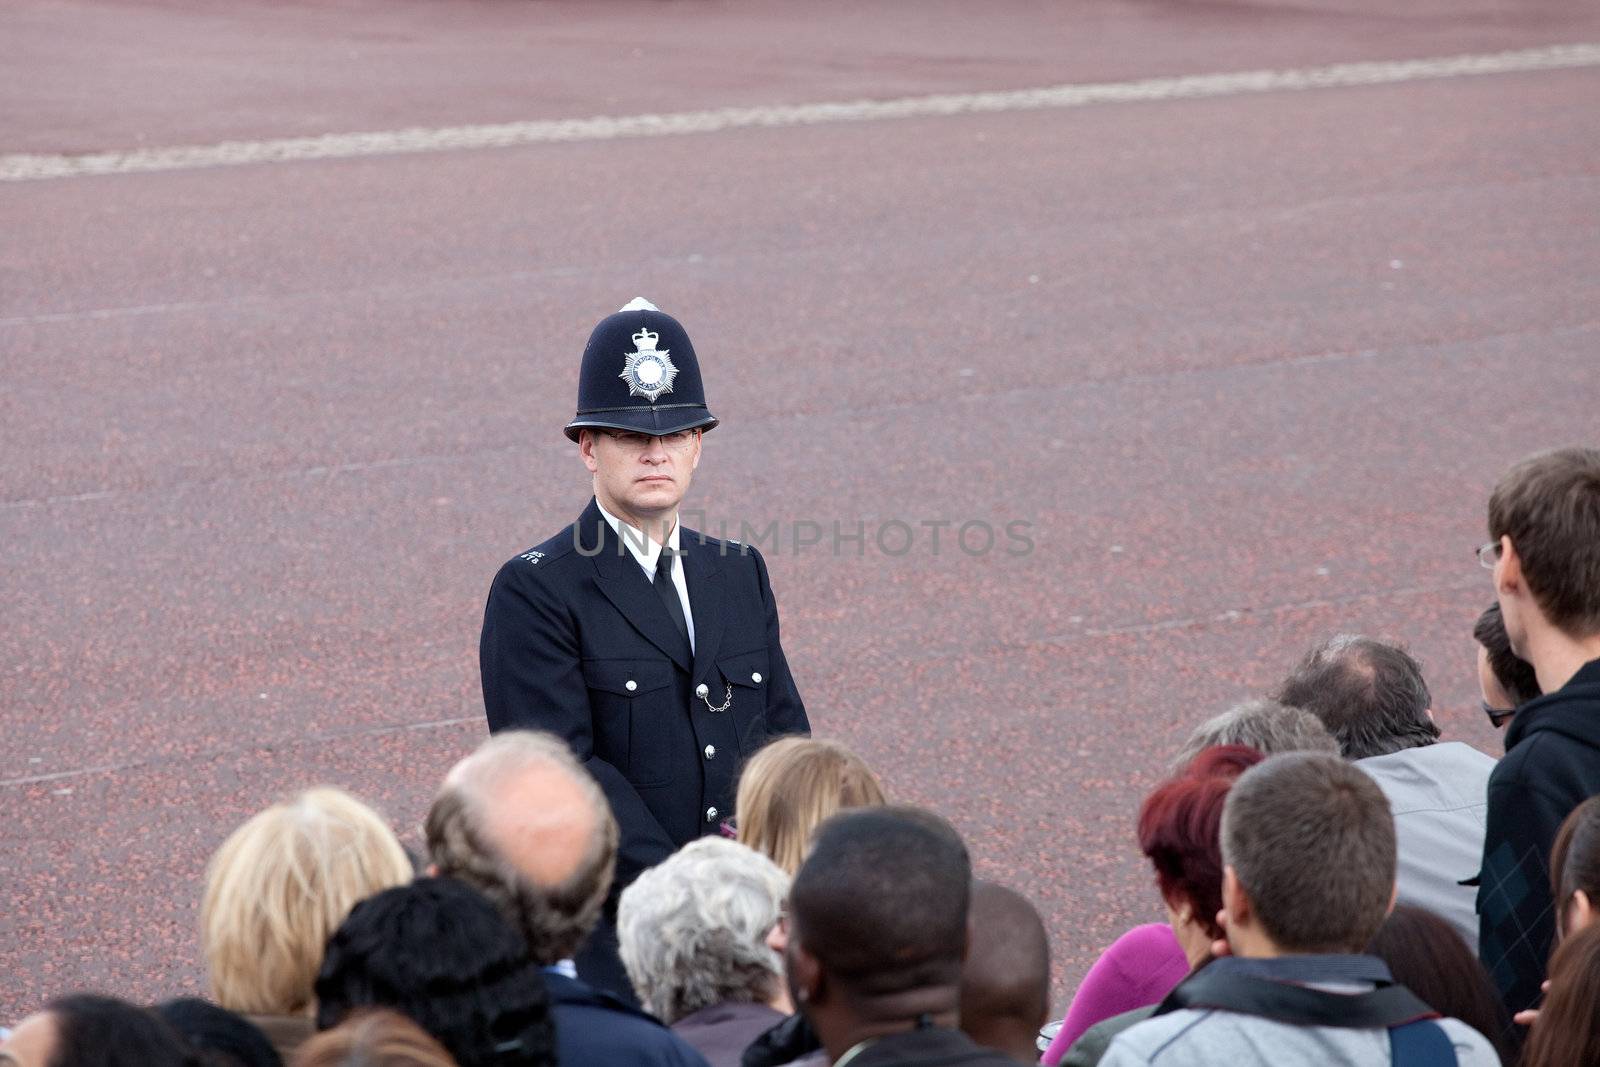 British policeman observes crowd by ints